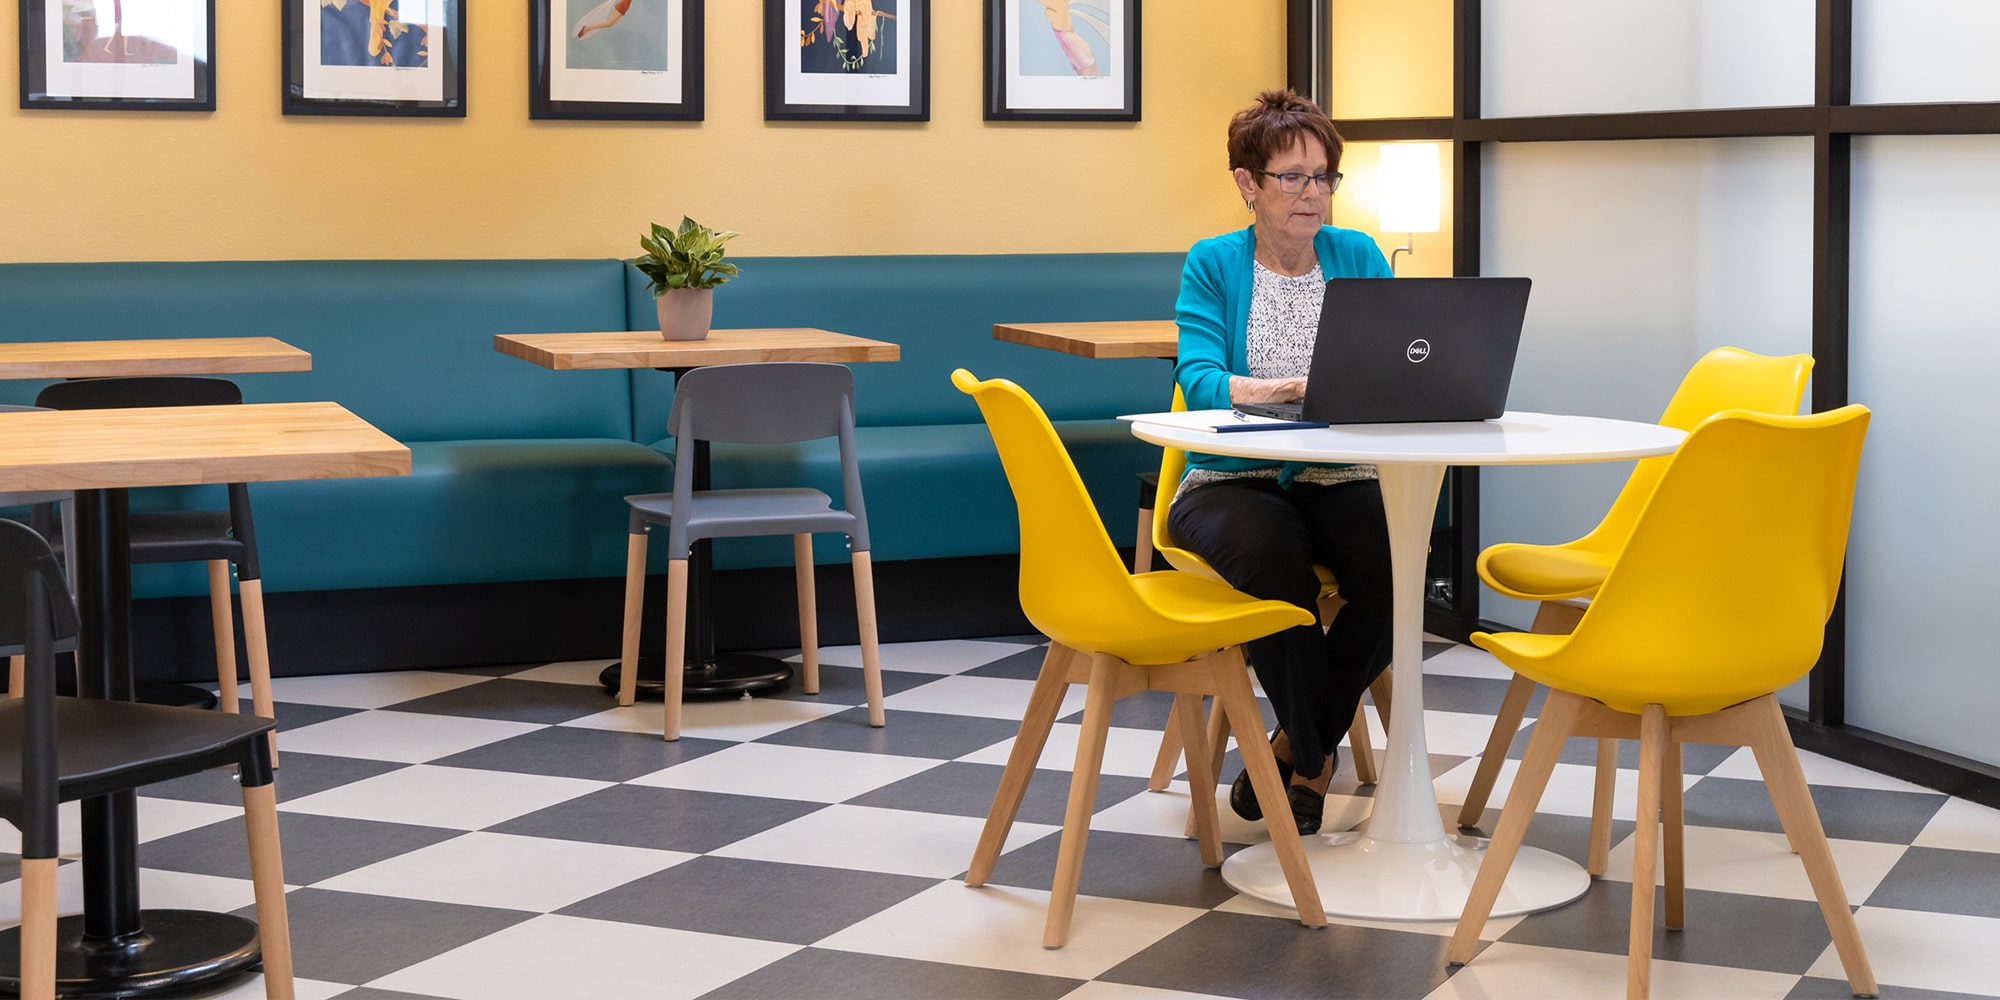 A woman works on her laptop in our kitchenette area in our coworking space.